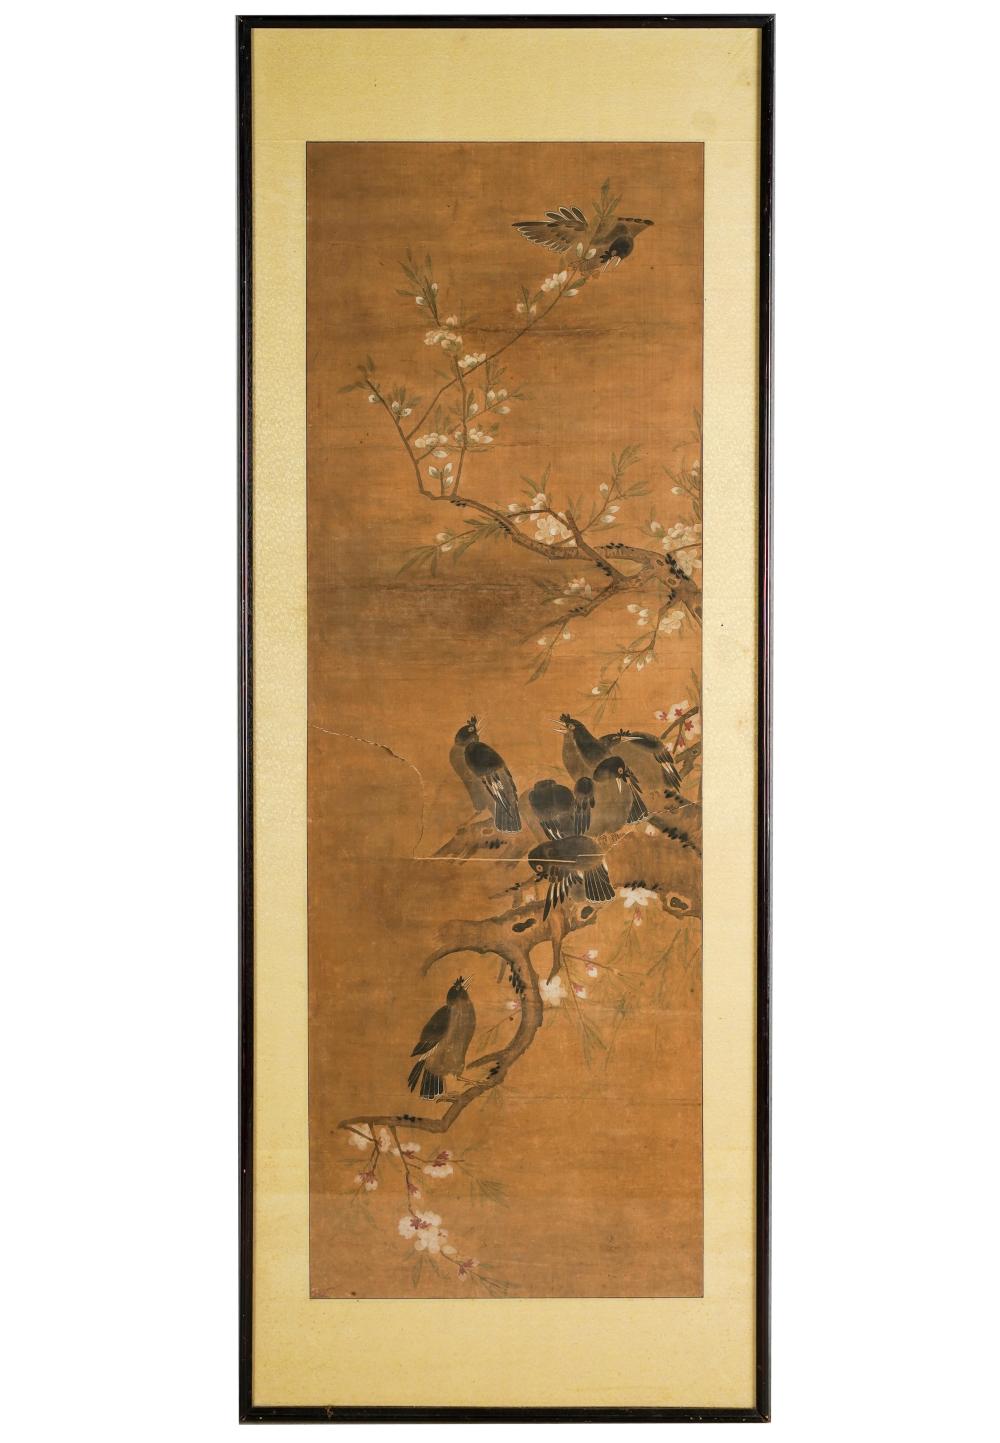 FRAMED CHINESE SCROLL PAINTINGpainted 3257cc